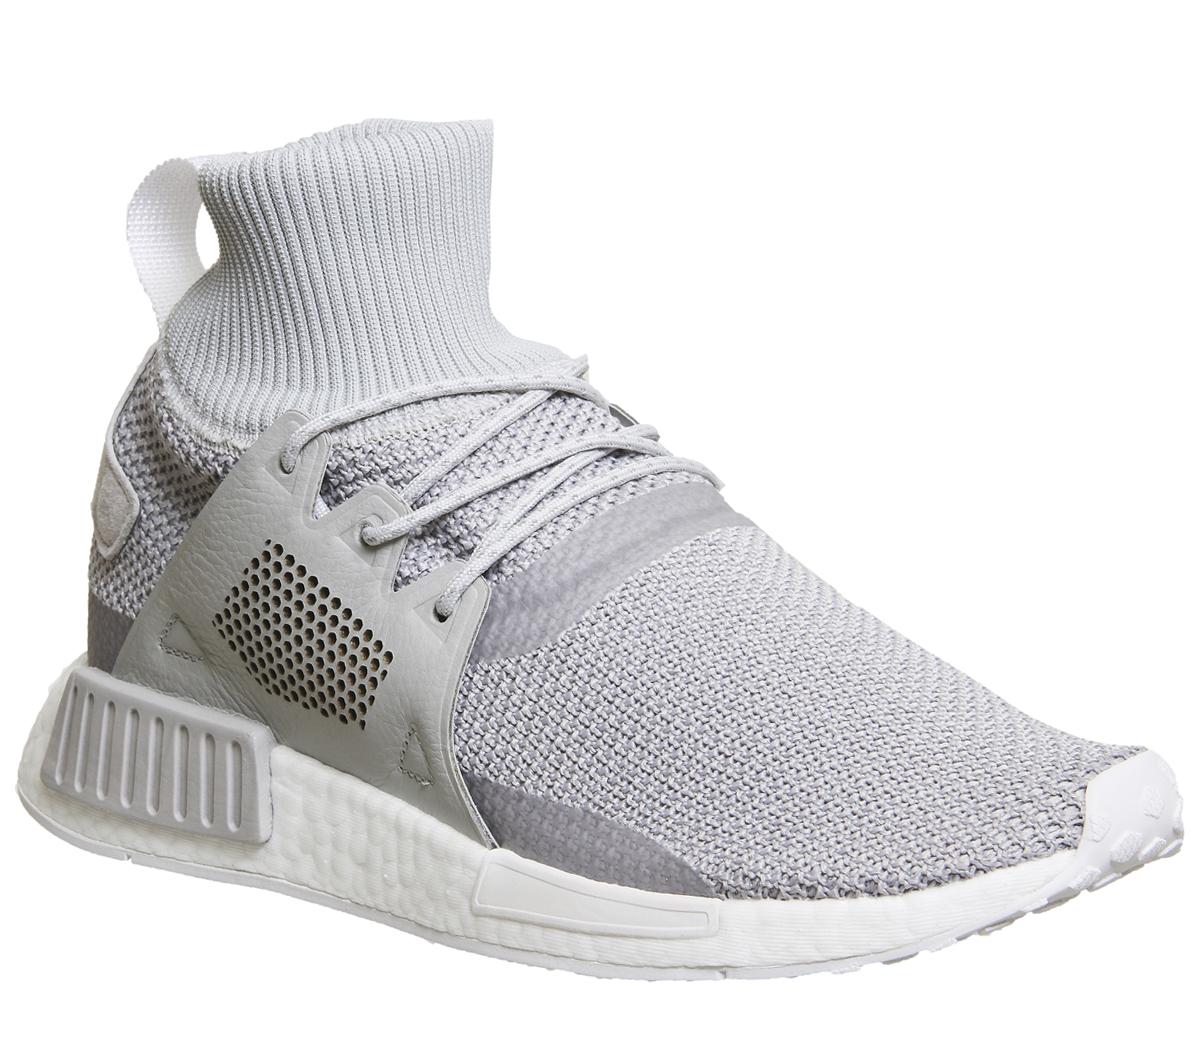 adidas Nmd Zr1 Winter Grey Two White - His trainers